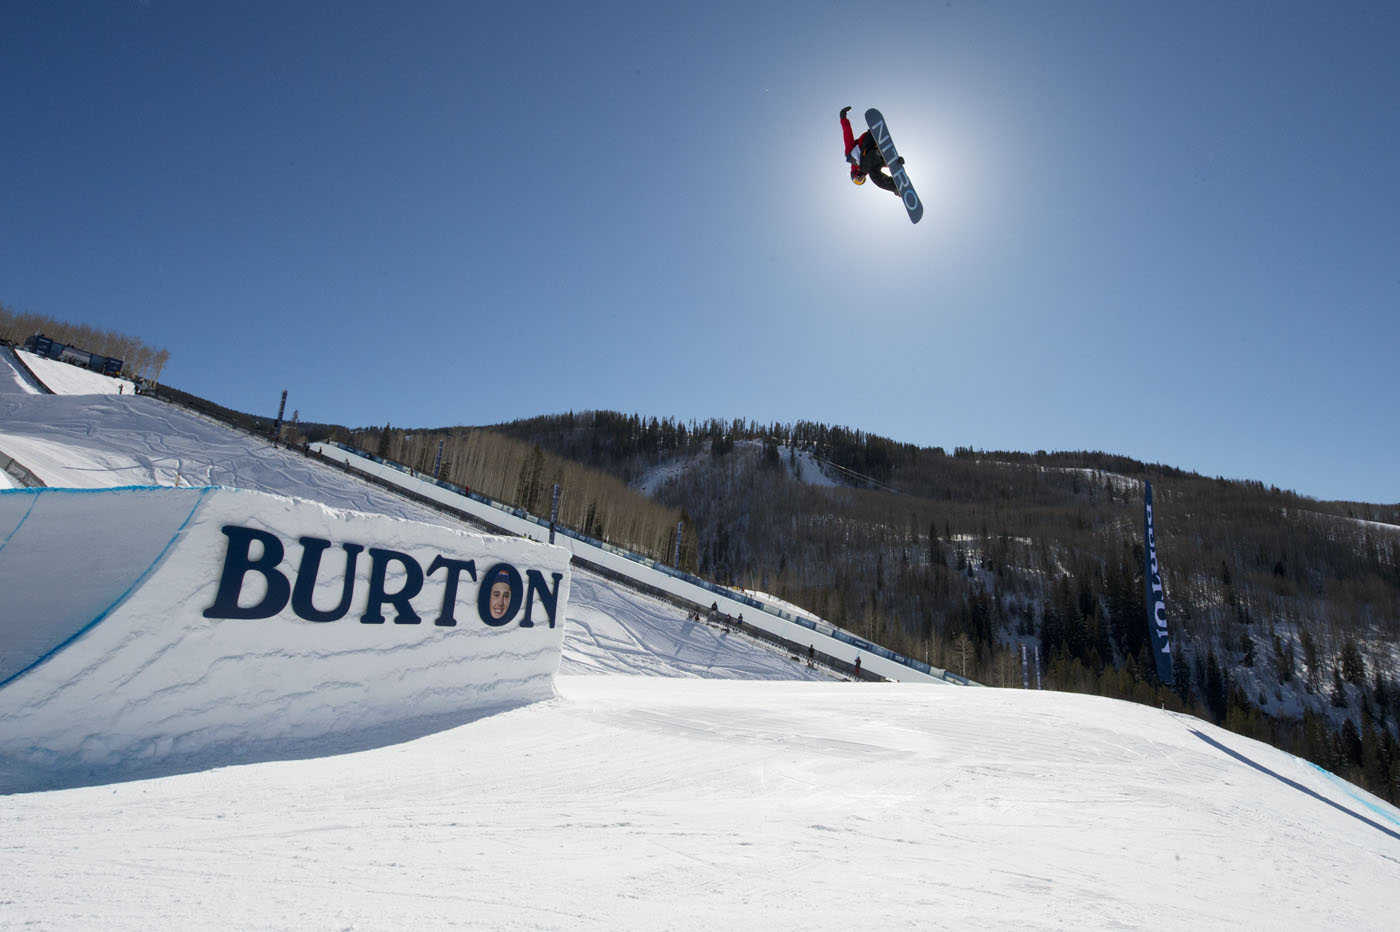 Monster Energy's Sven Thorgren Takes Third Place in Slopestyle at Burton US Open Snowboarding in Vail, CO